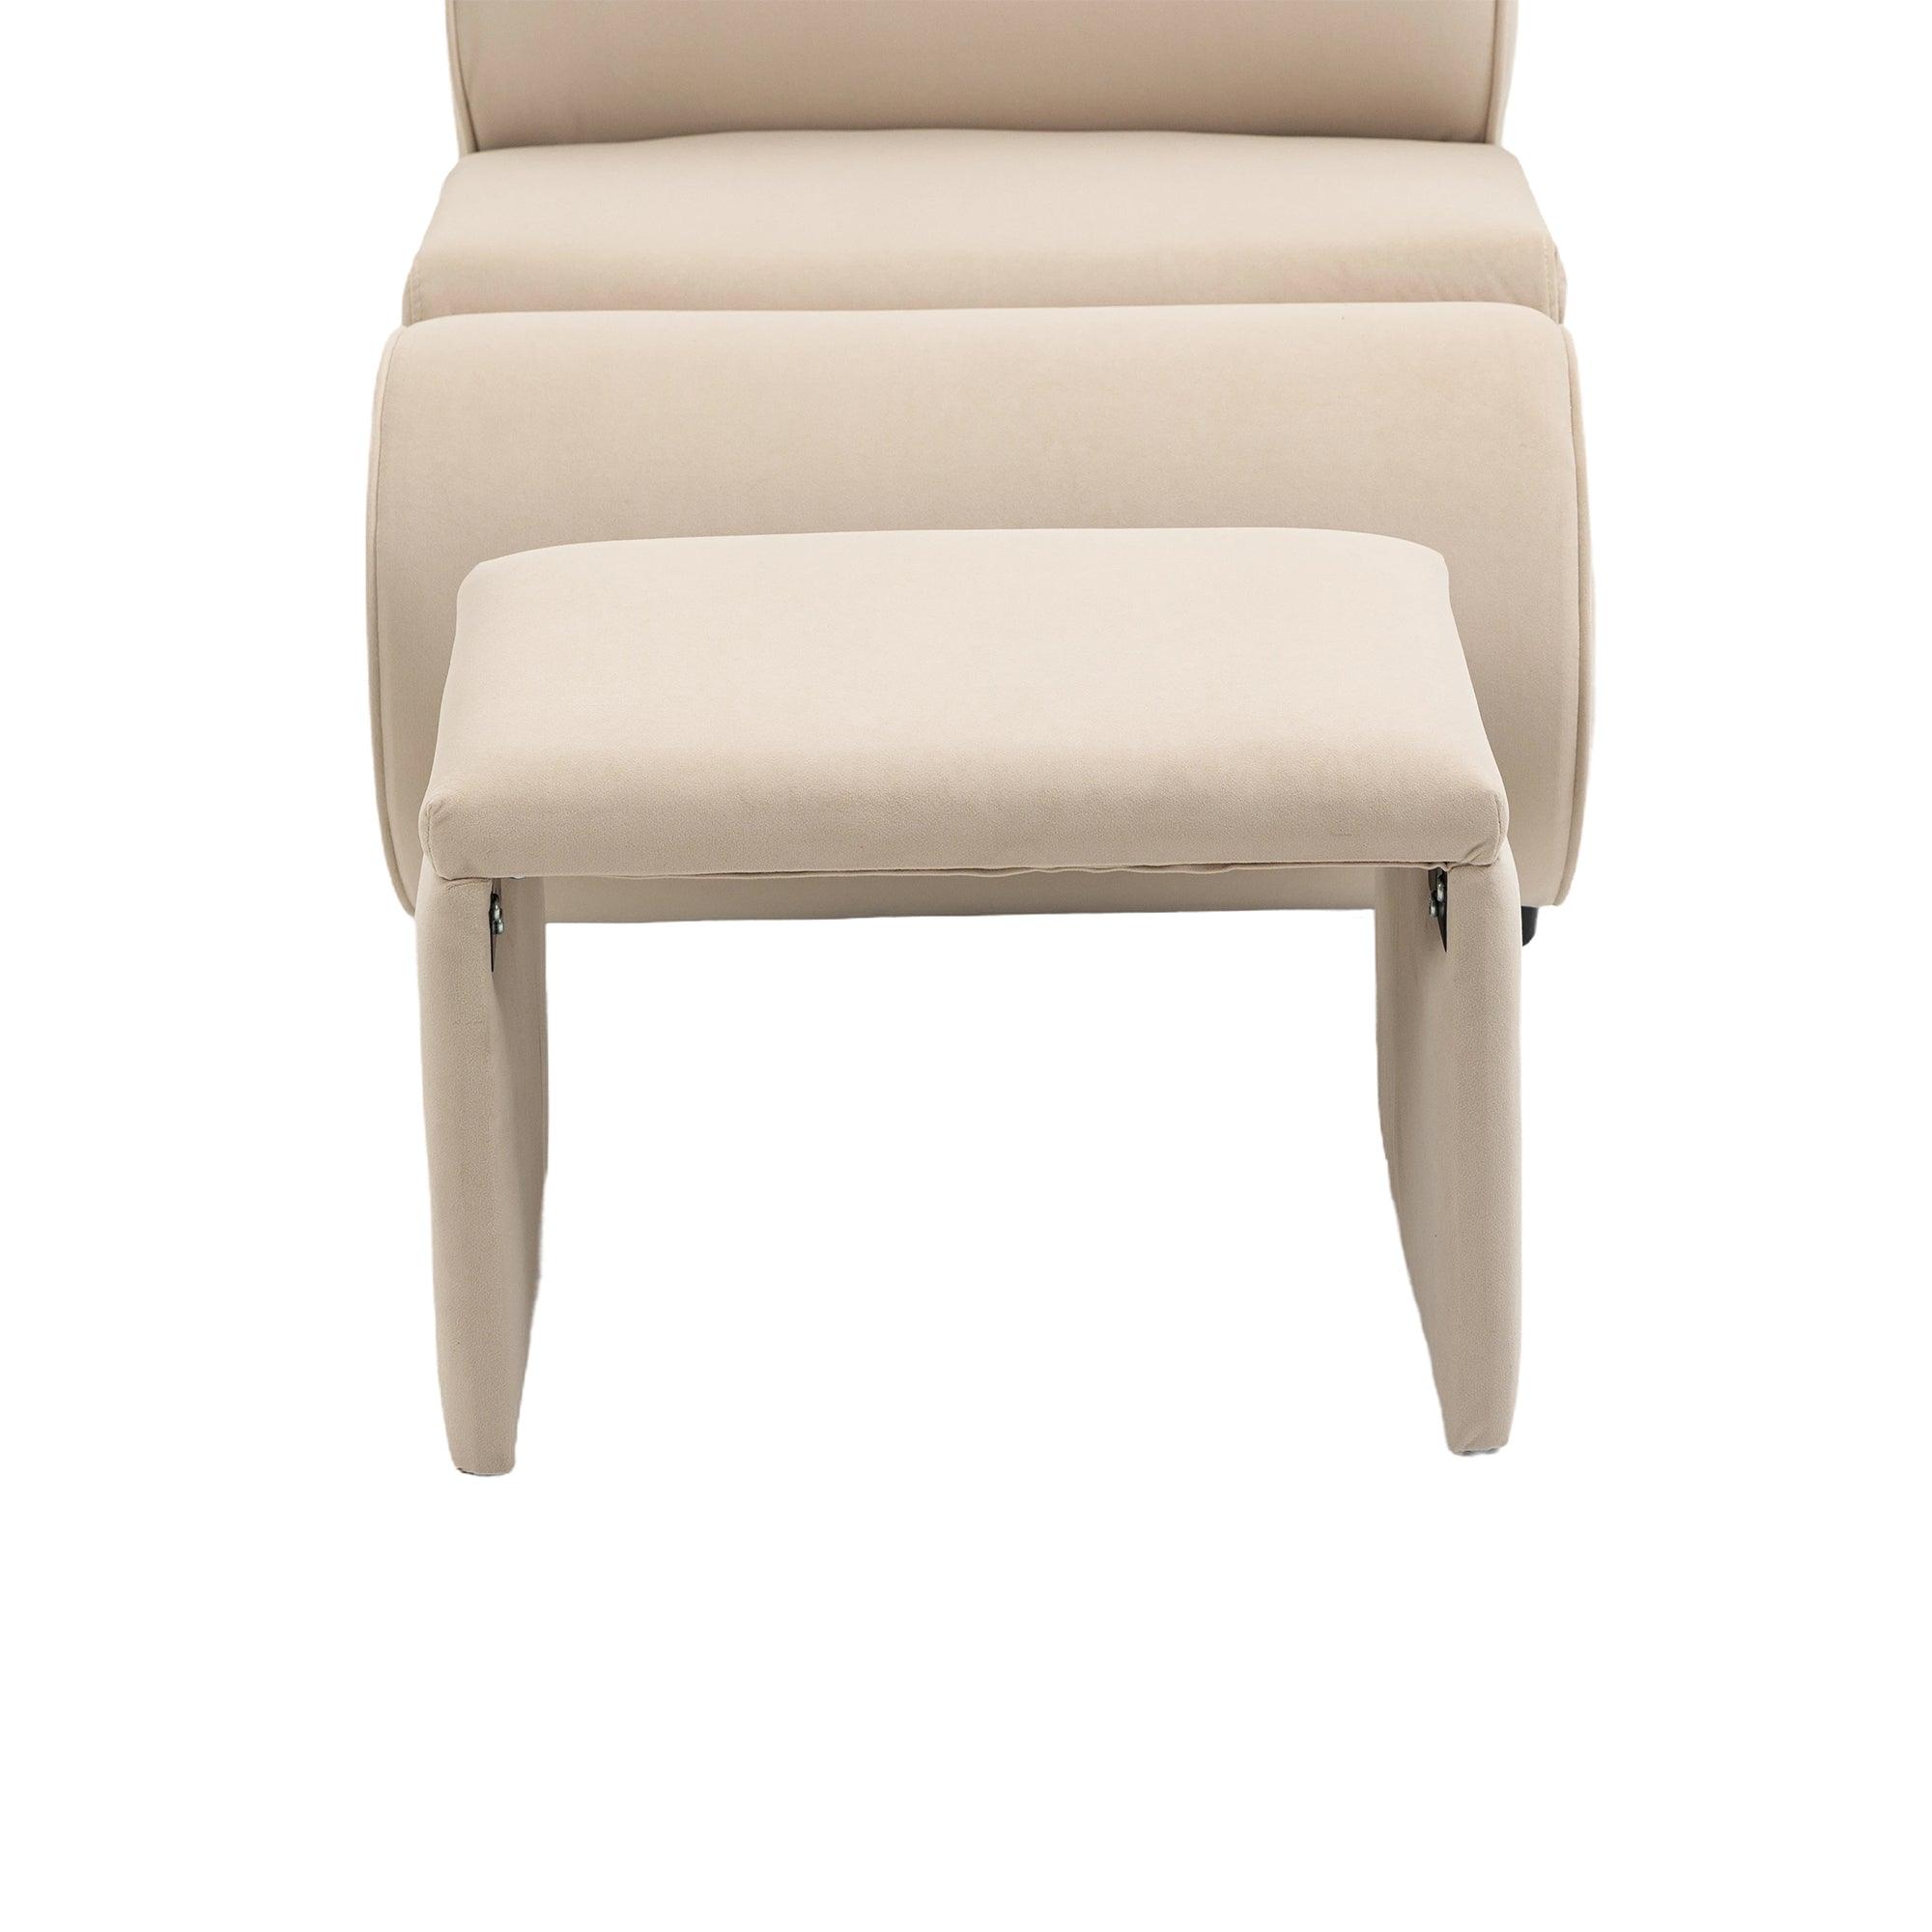 Accent Chair With Ottoman, Cushioned Deep Seat For Living Room, Beige LamCham